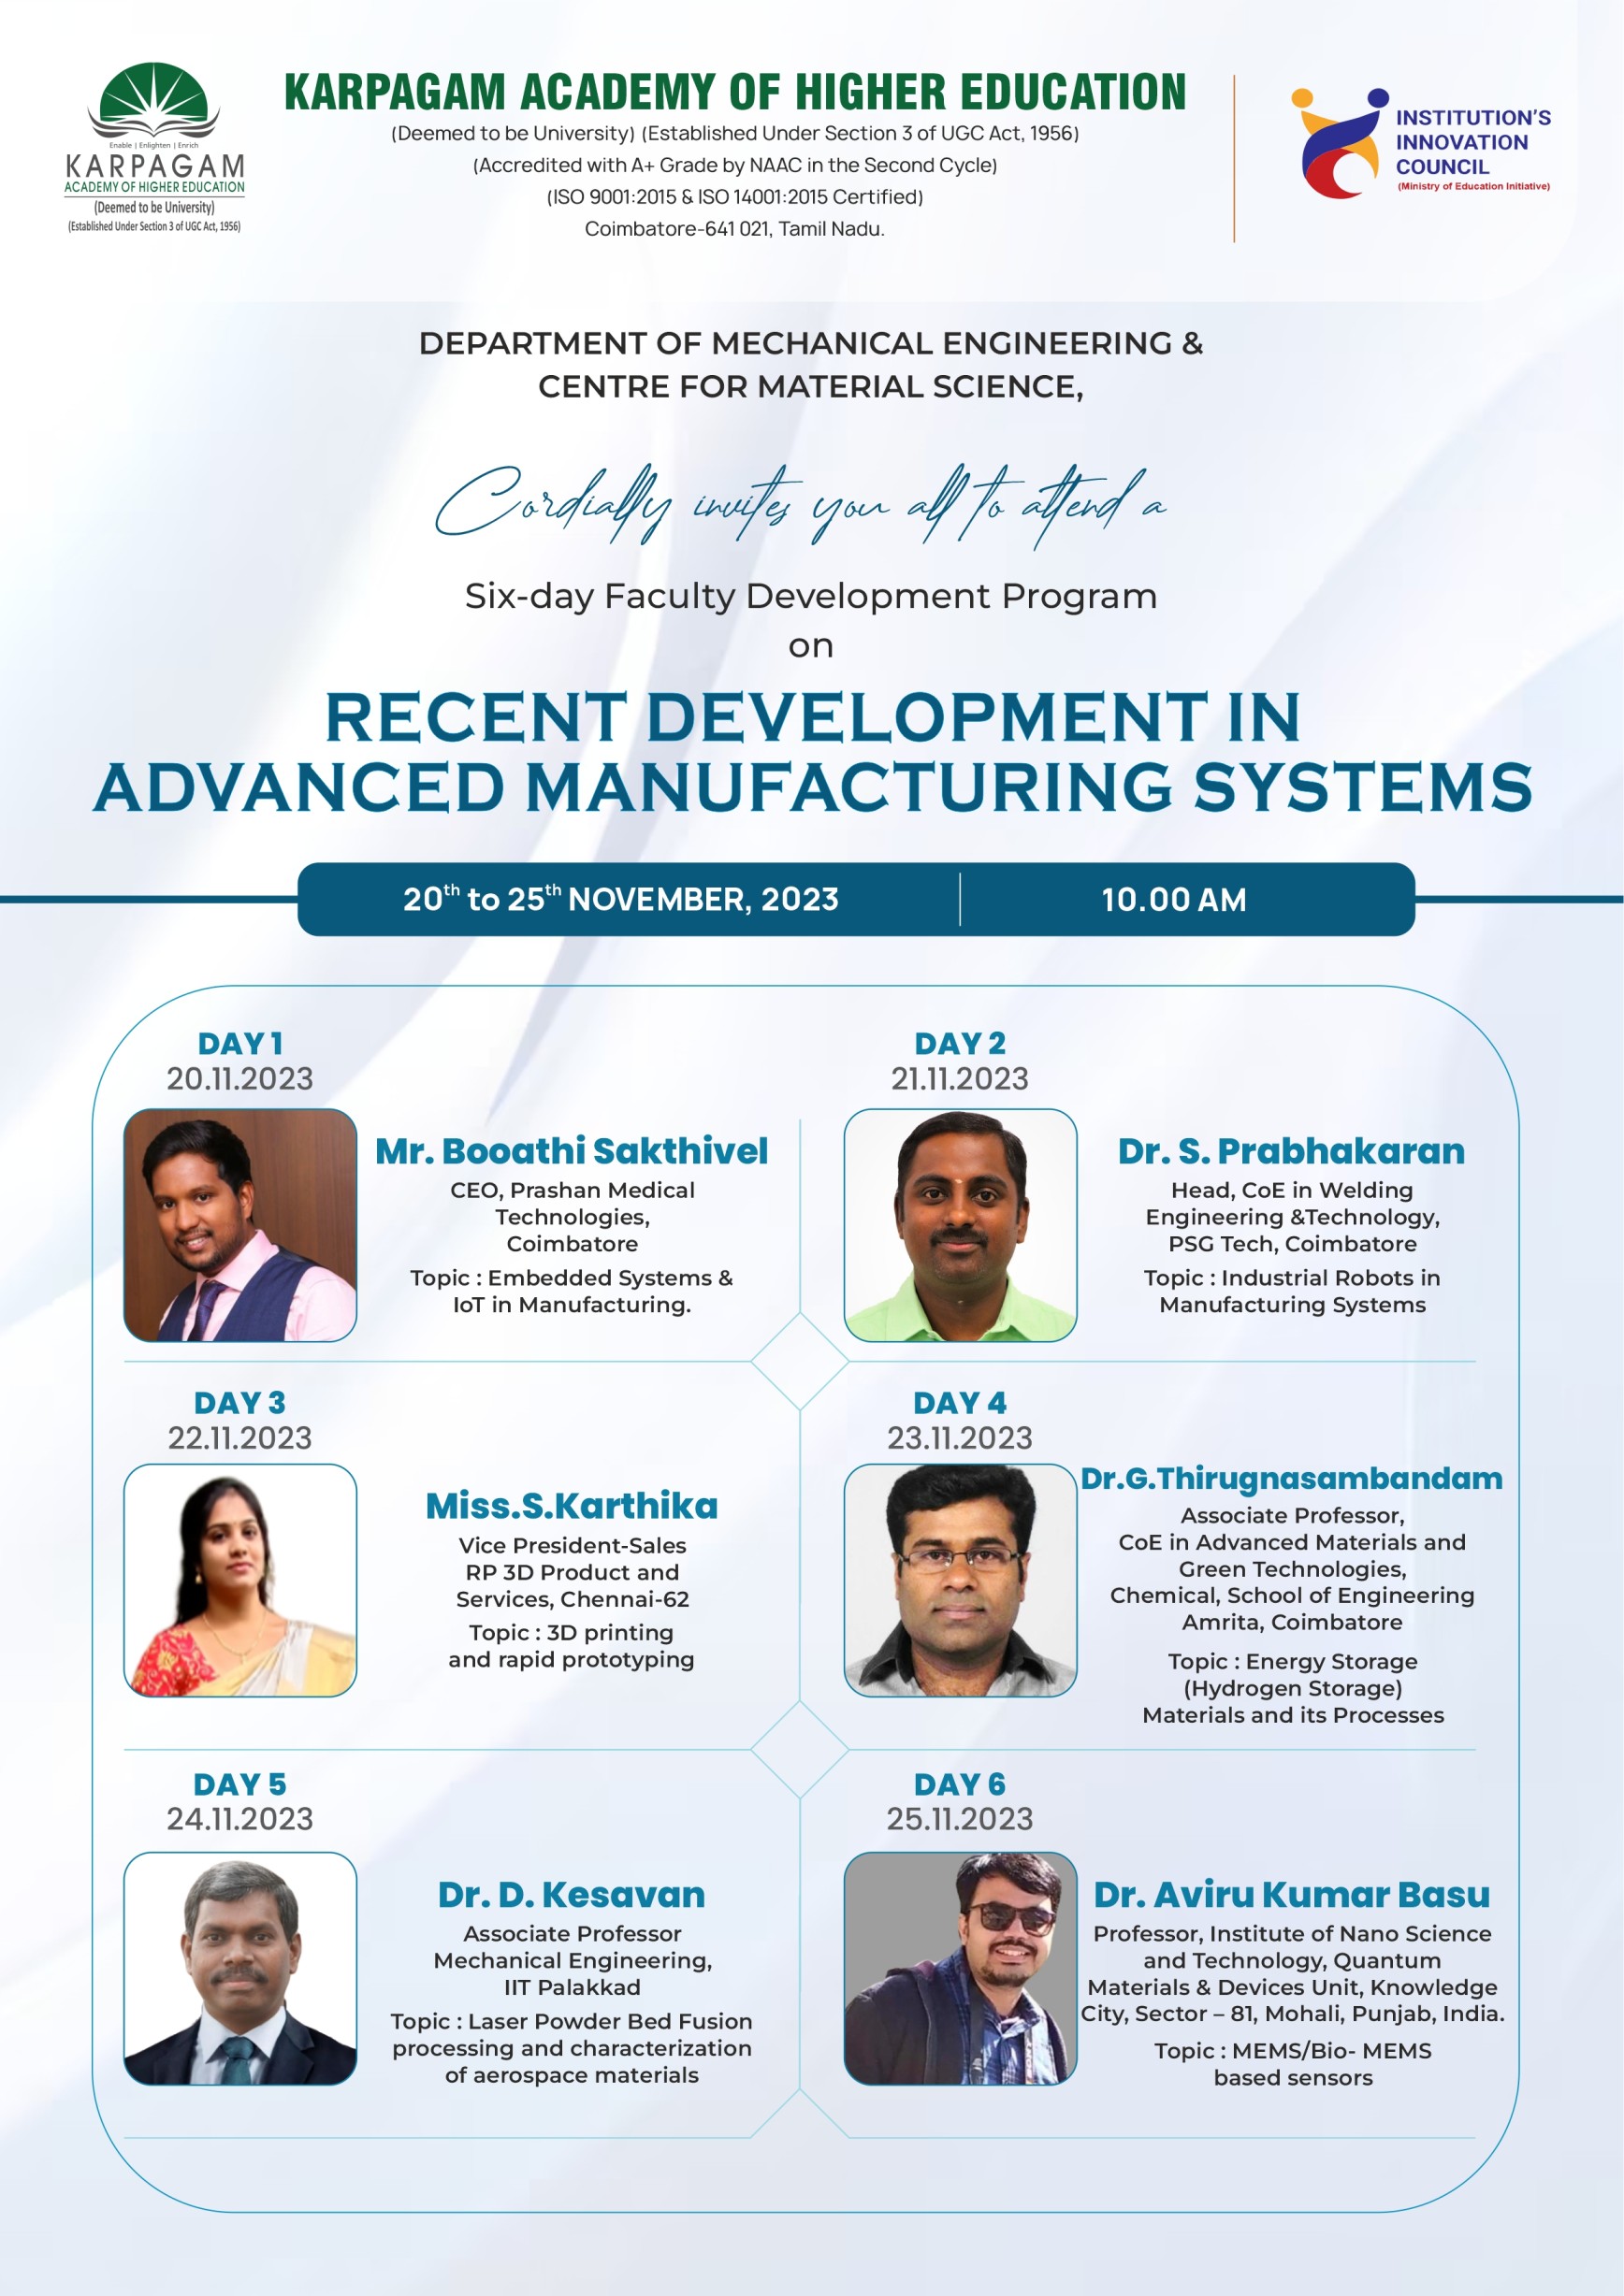 SIX-day FDP on Recent Development in Advanced Manufacturing Systems RDAMS'23